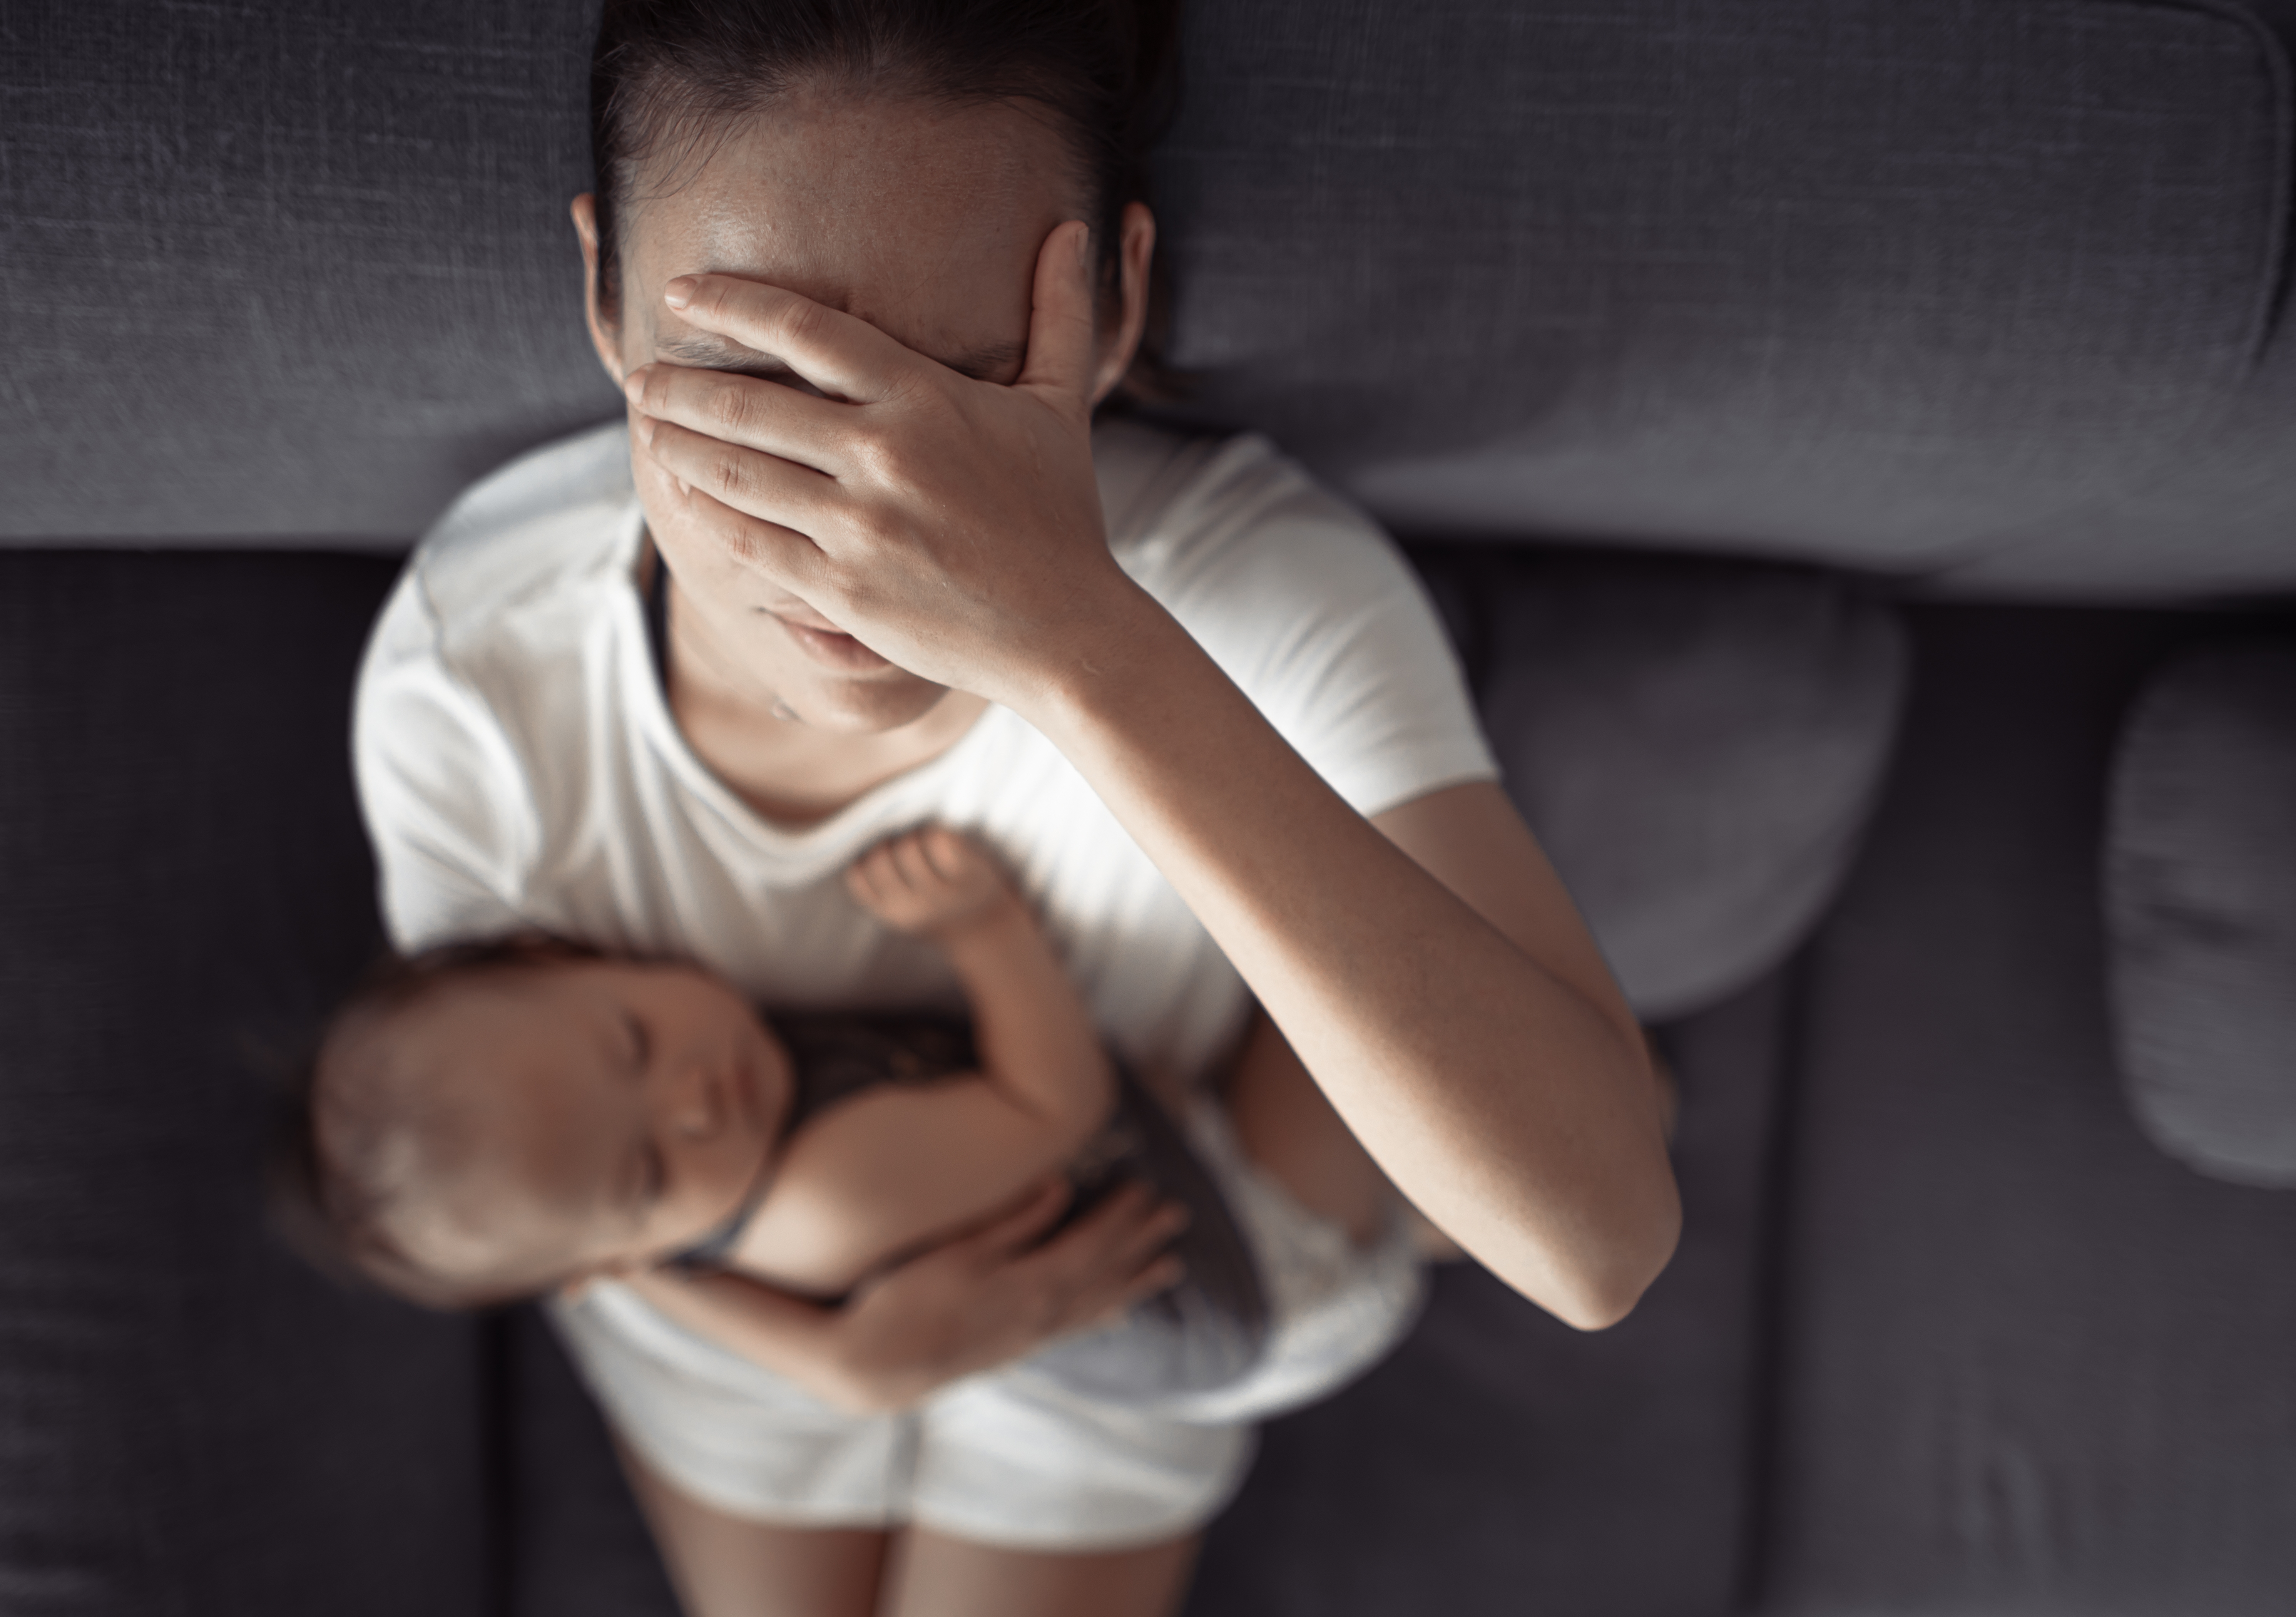 A frustrated woman with a baby | Source: Shutterstock